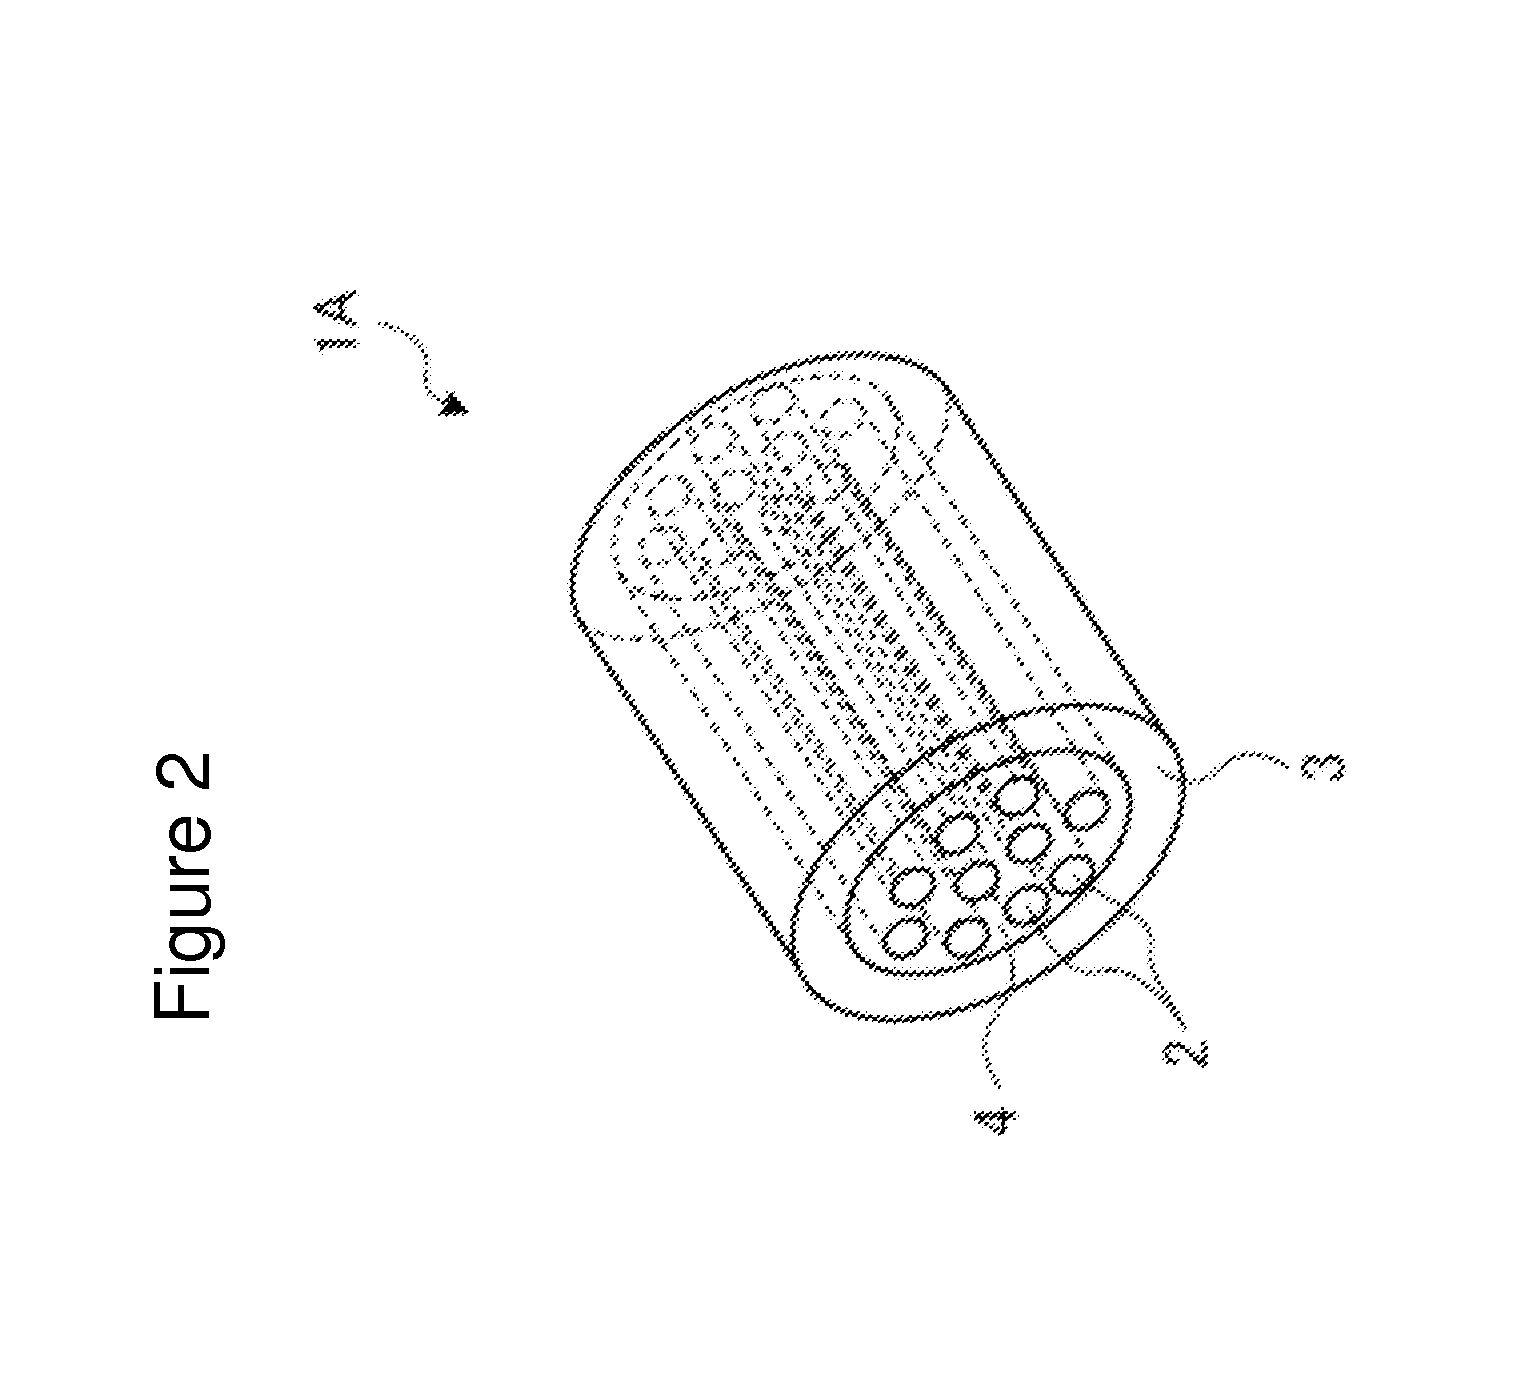 Carbon fiber-reinforced thermoplastic resin composition, molding material, prepreg, and methods for producing same